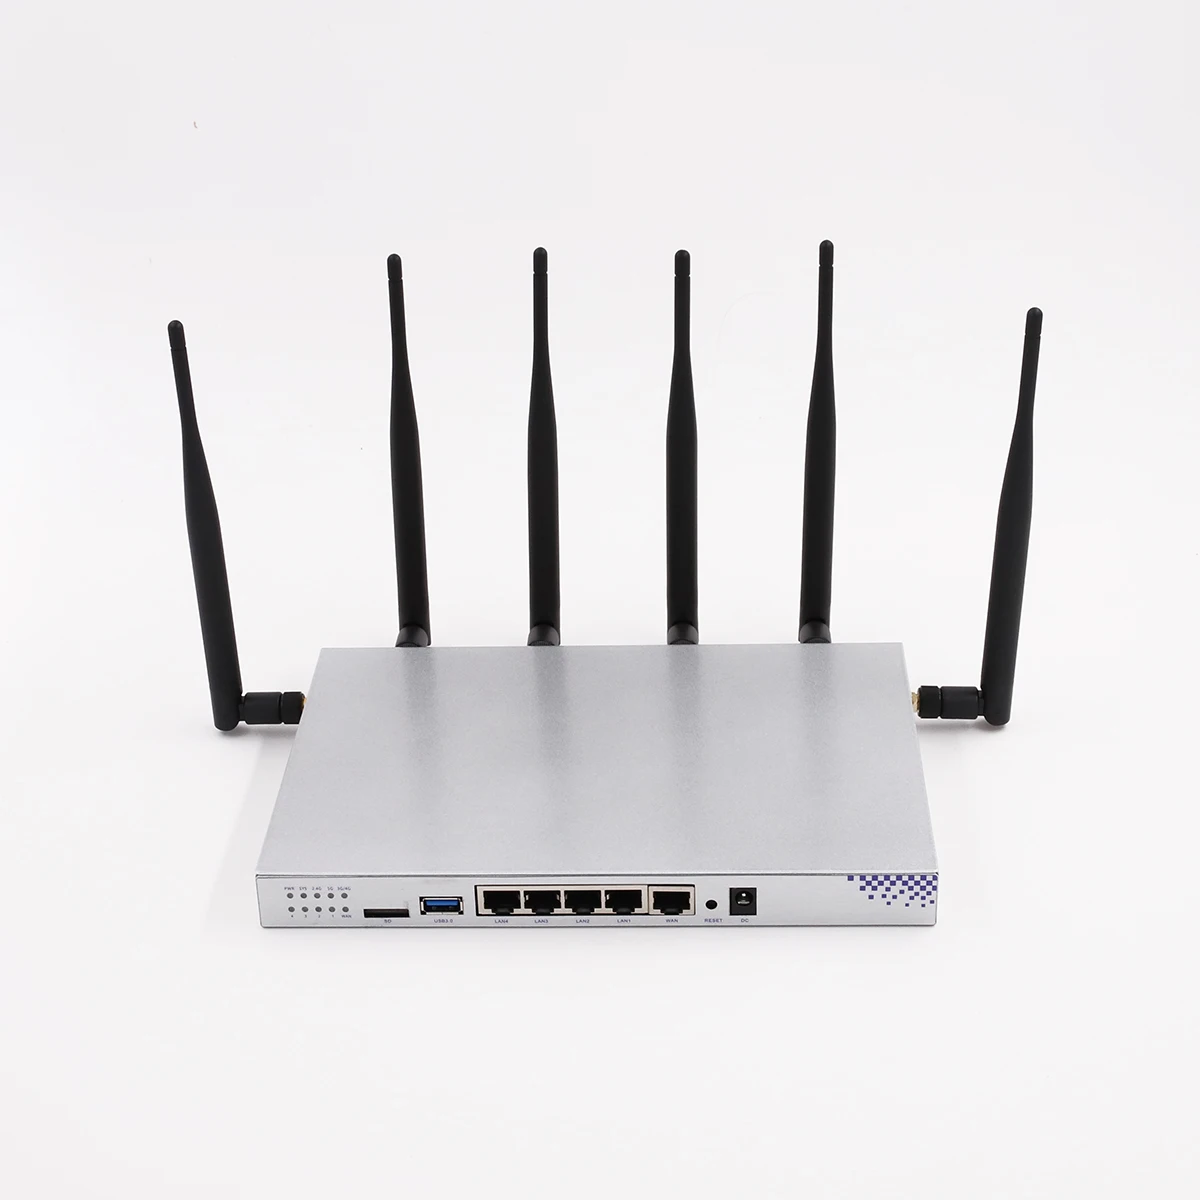 
WG3526 wifi router with best range for United states 